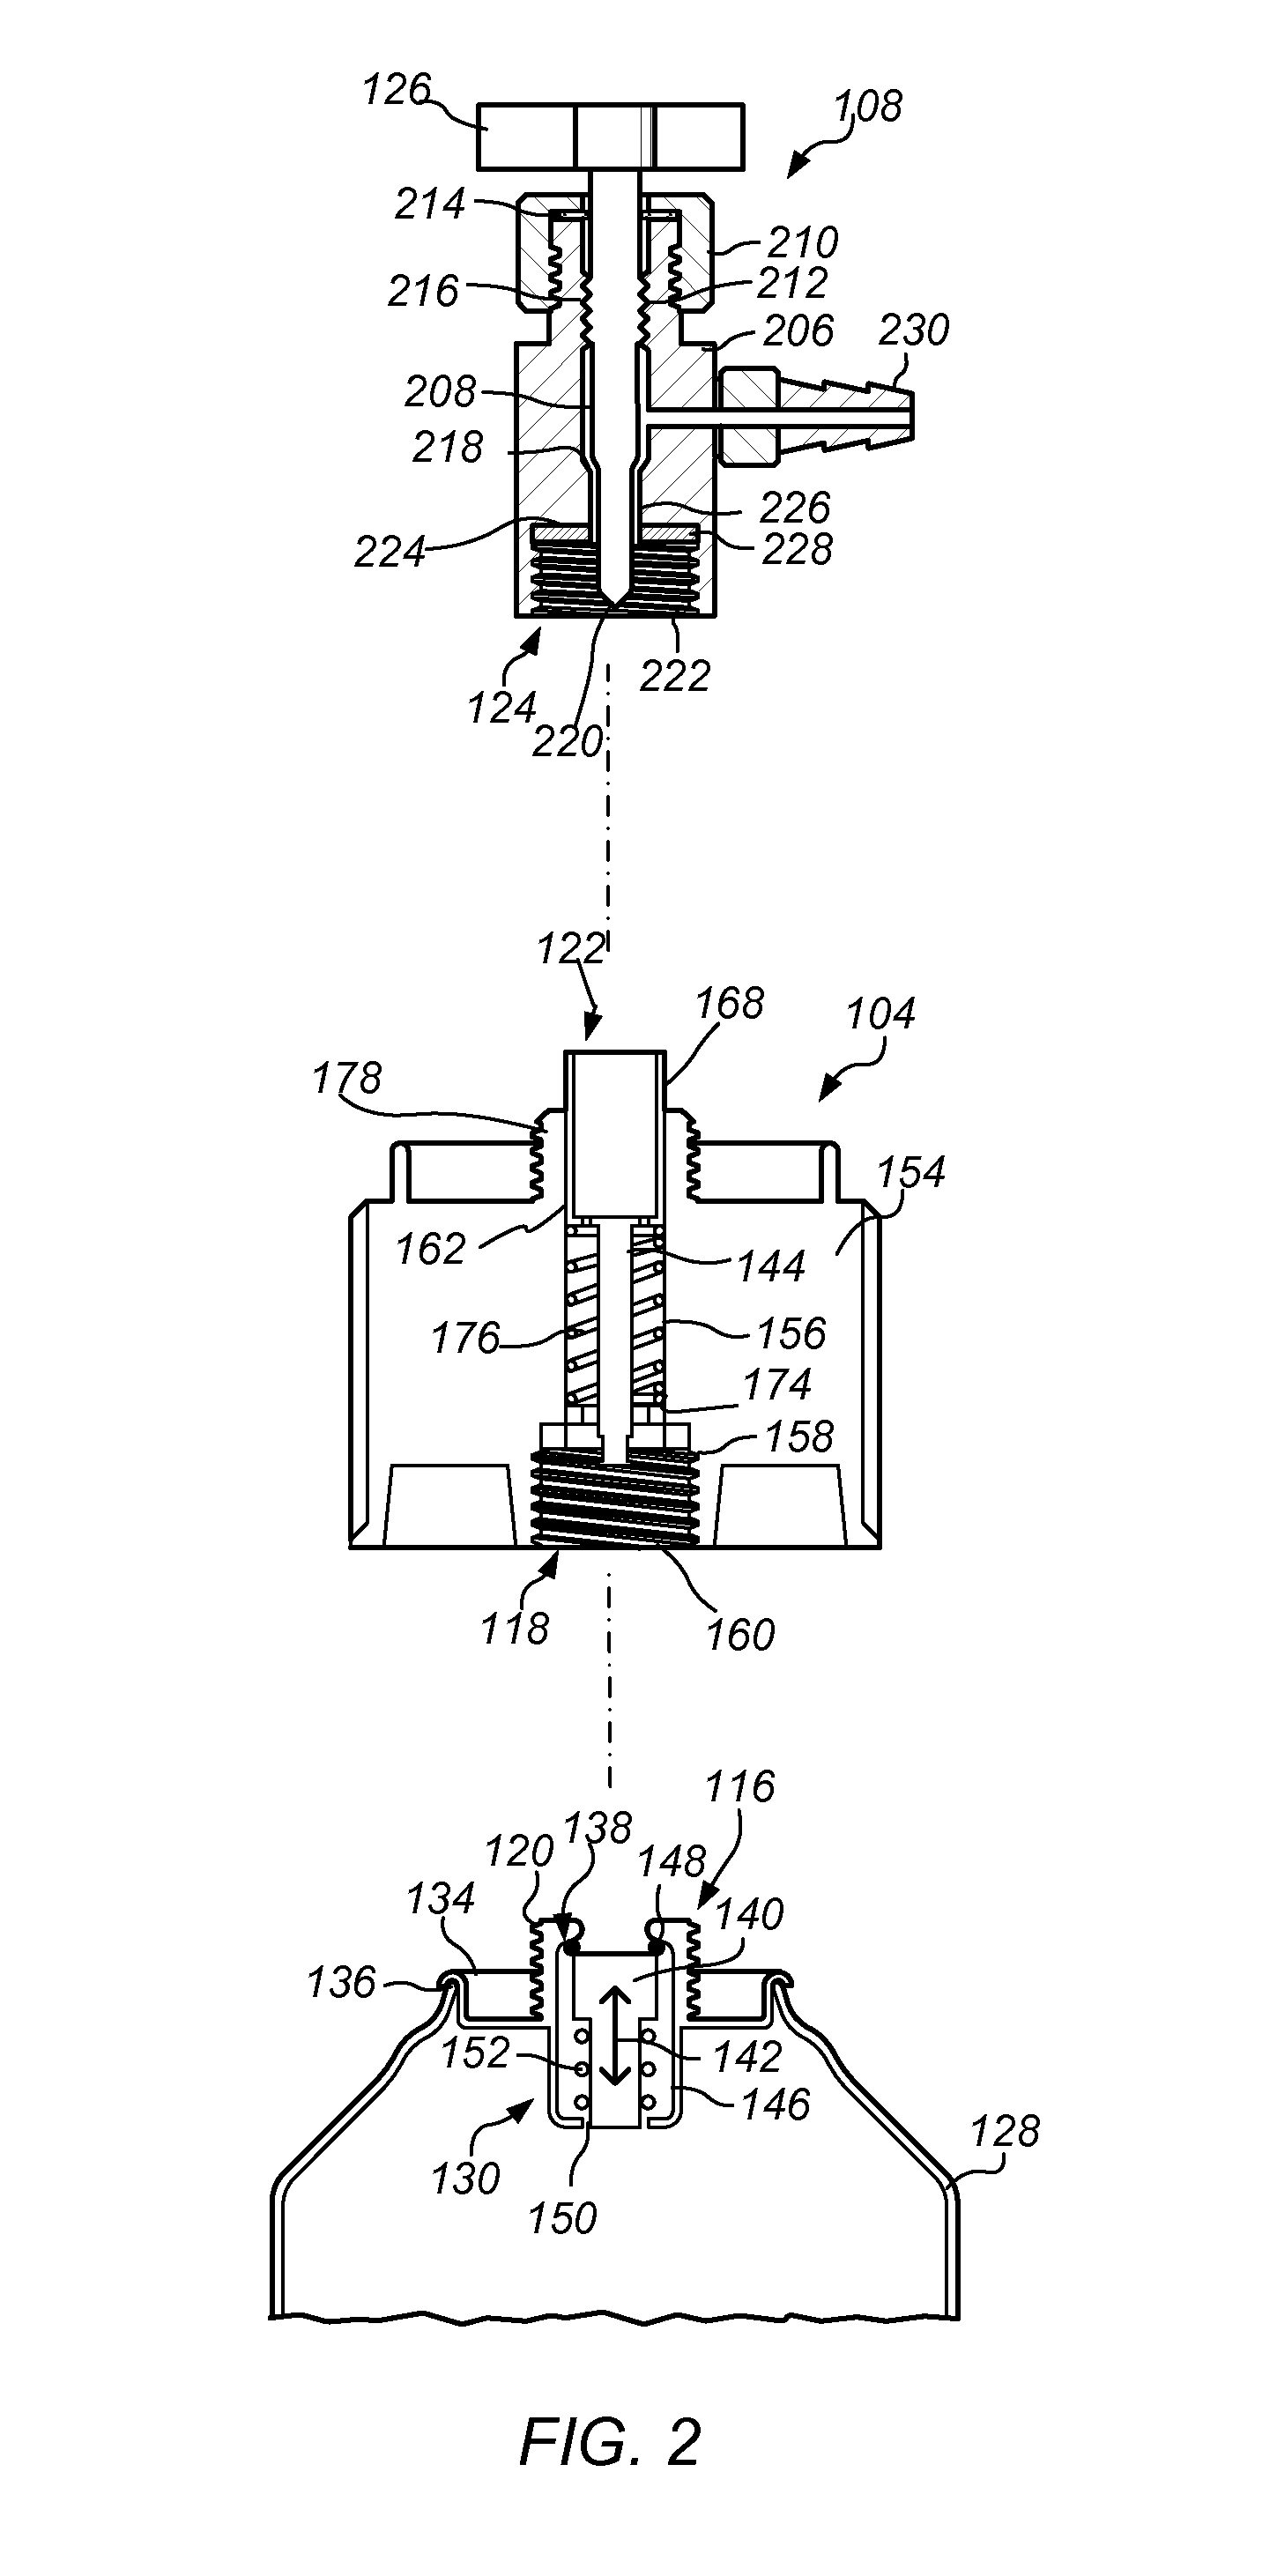 Adapter system and method